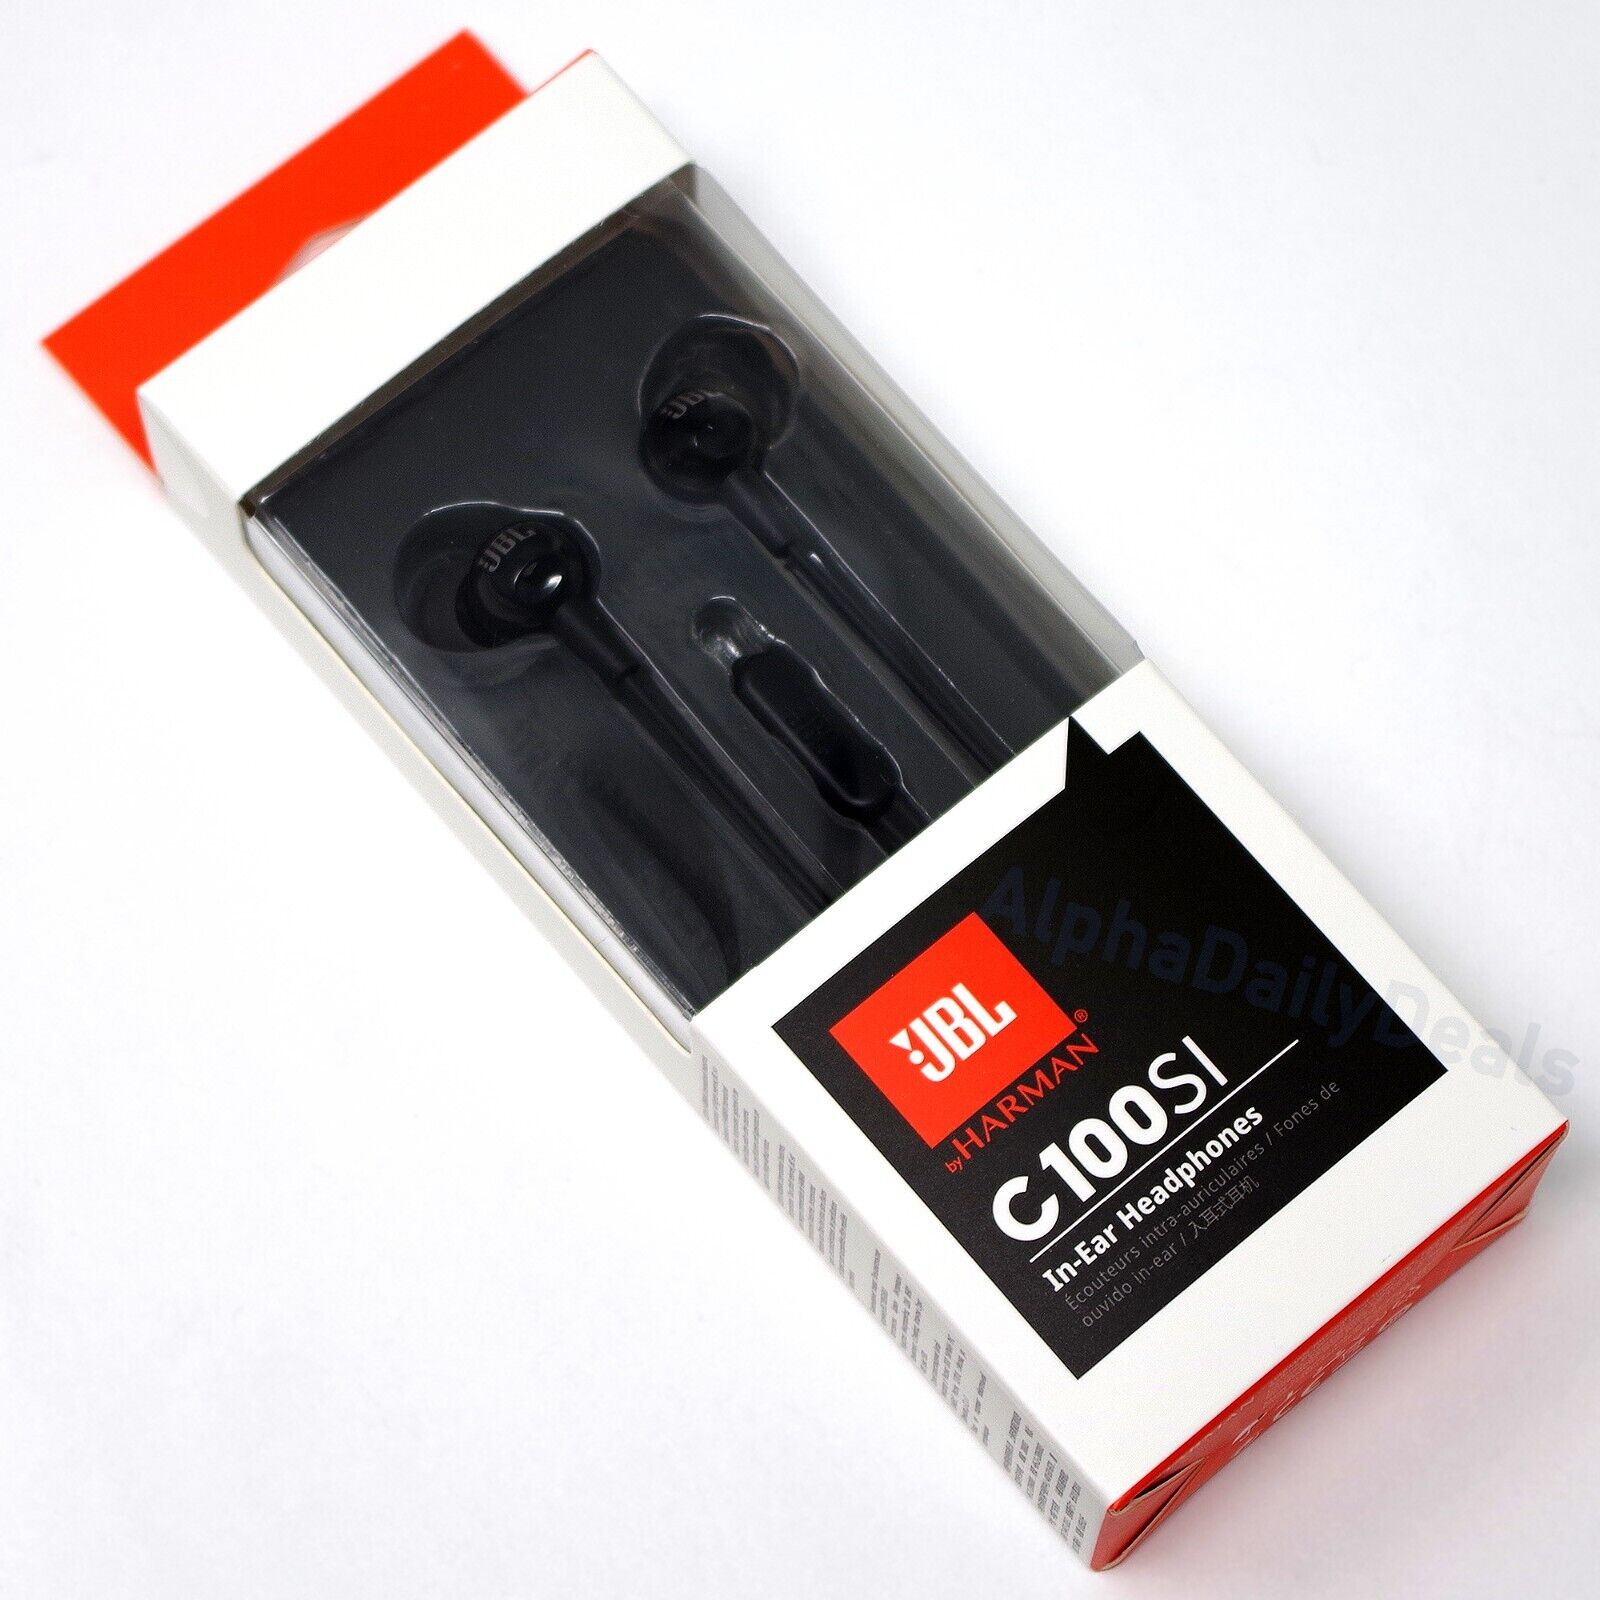 Original JBL C100SI Wired Earbuds with Microphone Remote 3.5mm Jack Black